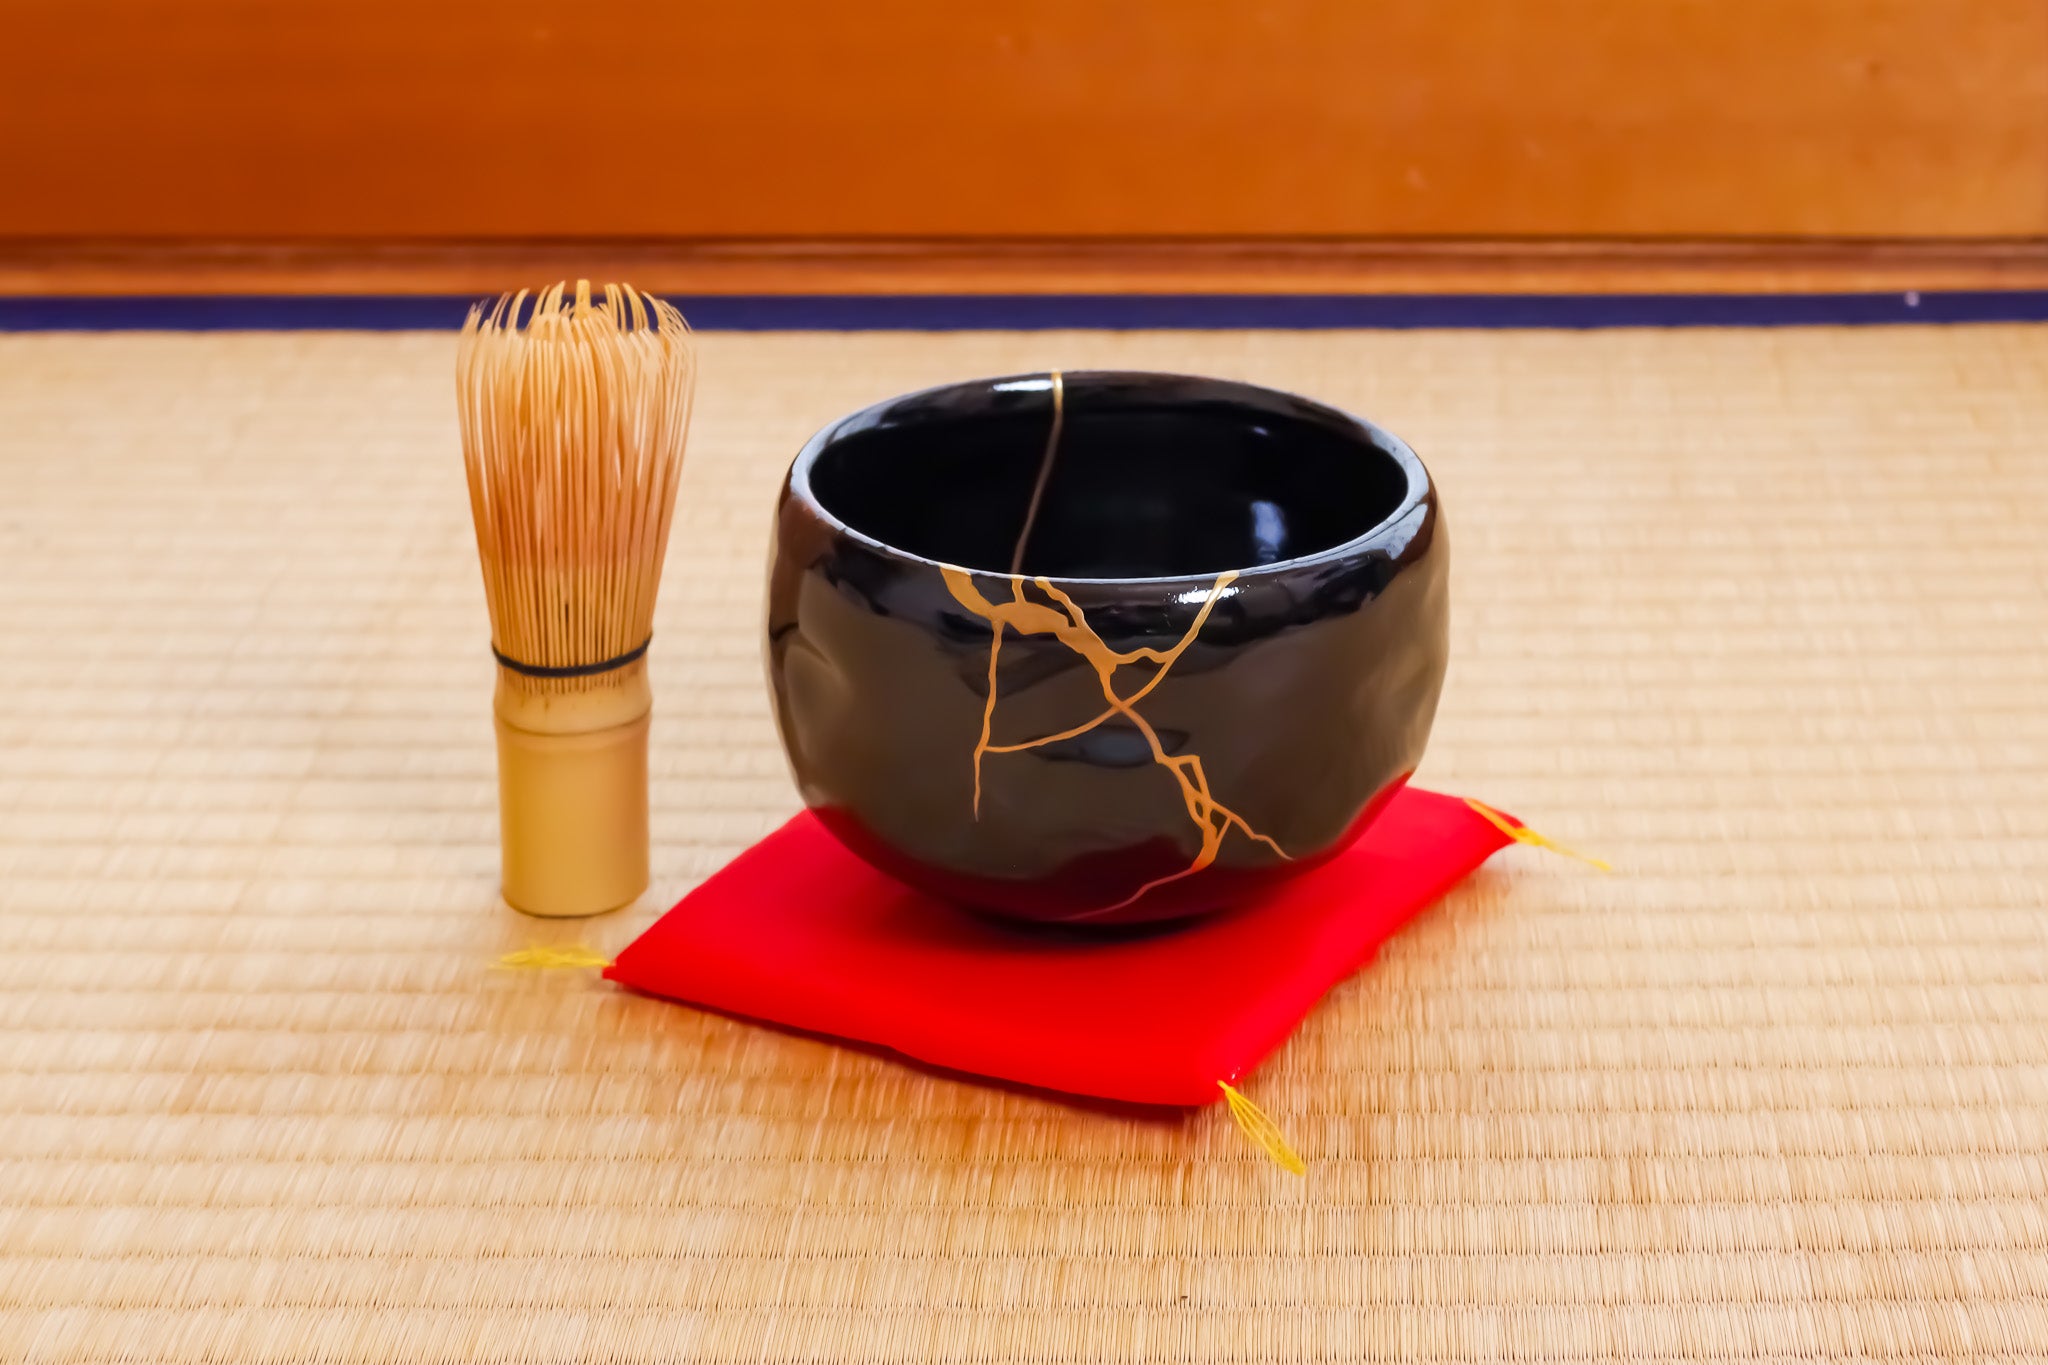 Authentic Kintsugi Pottery bowl in use